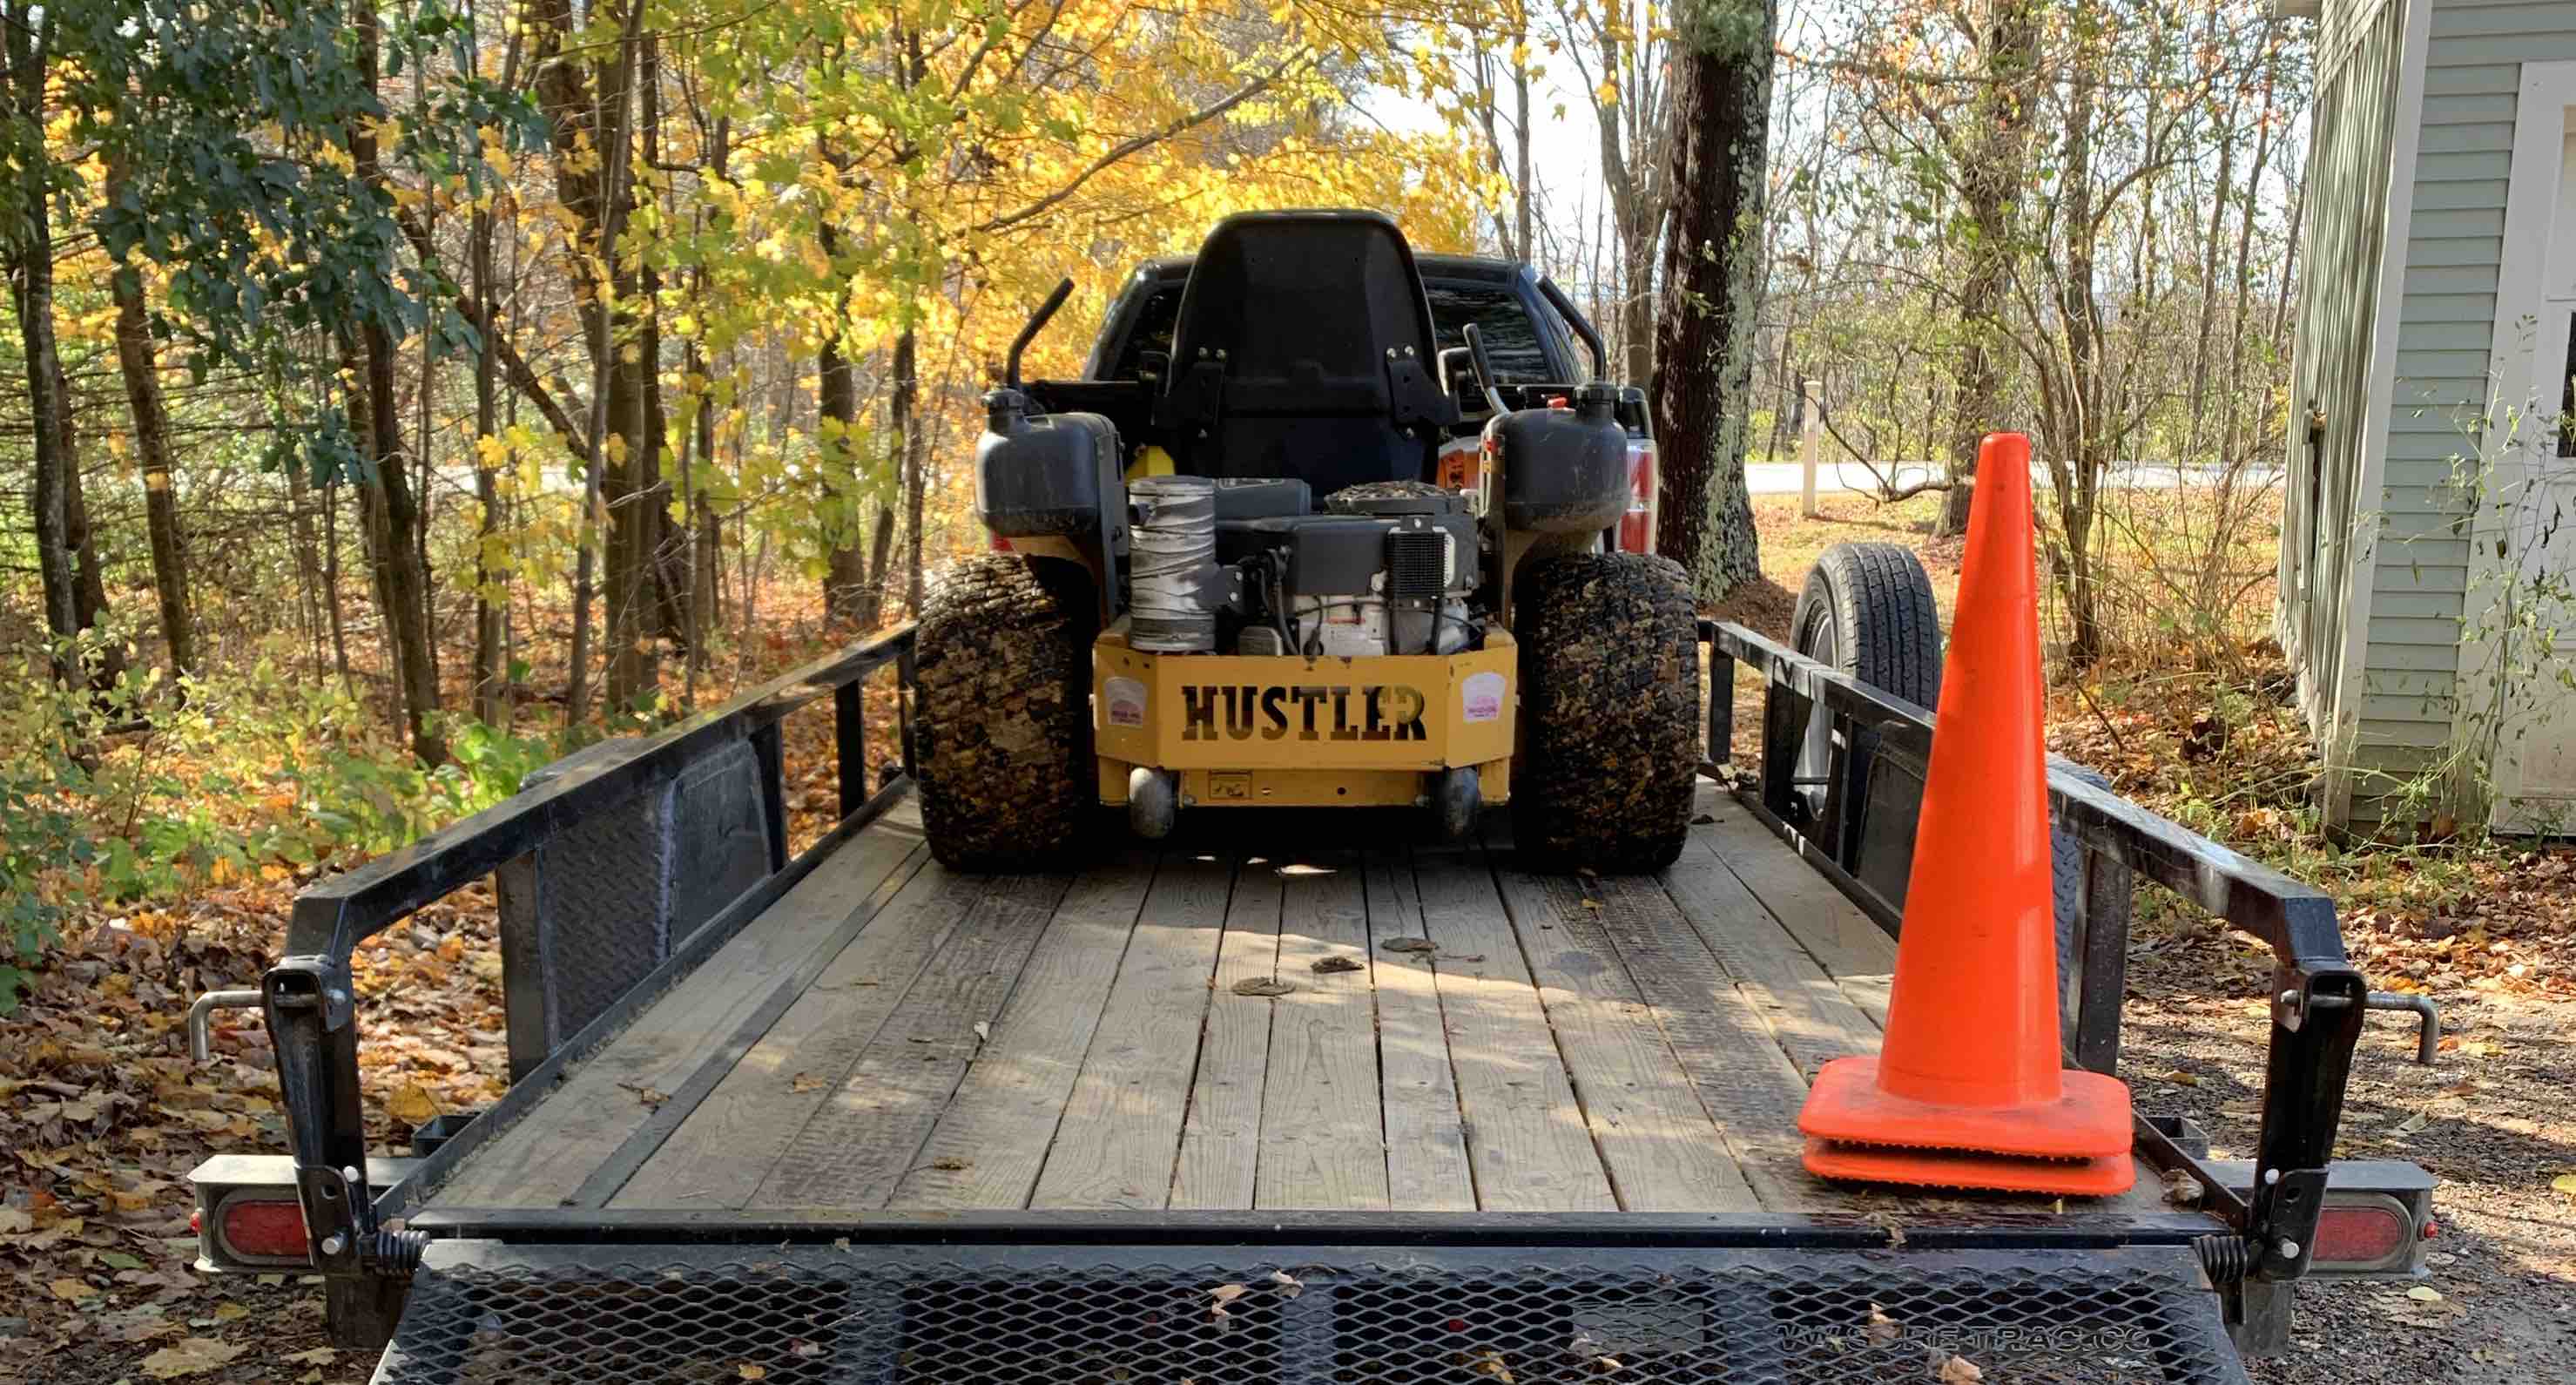 The rear view of a lawn mower on a utility trailer with the gate down.